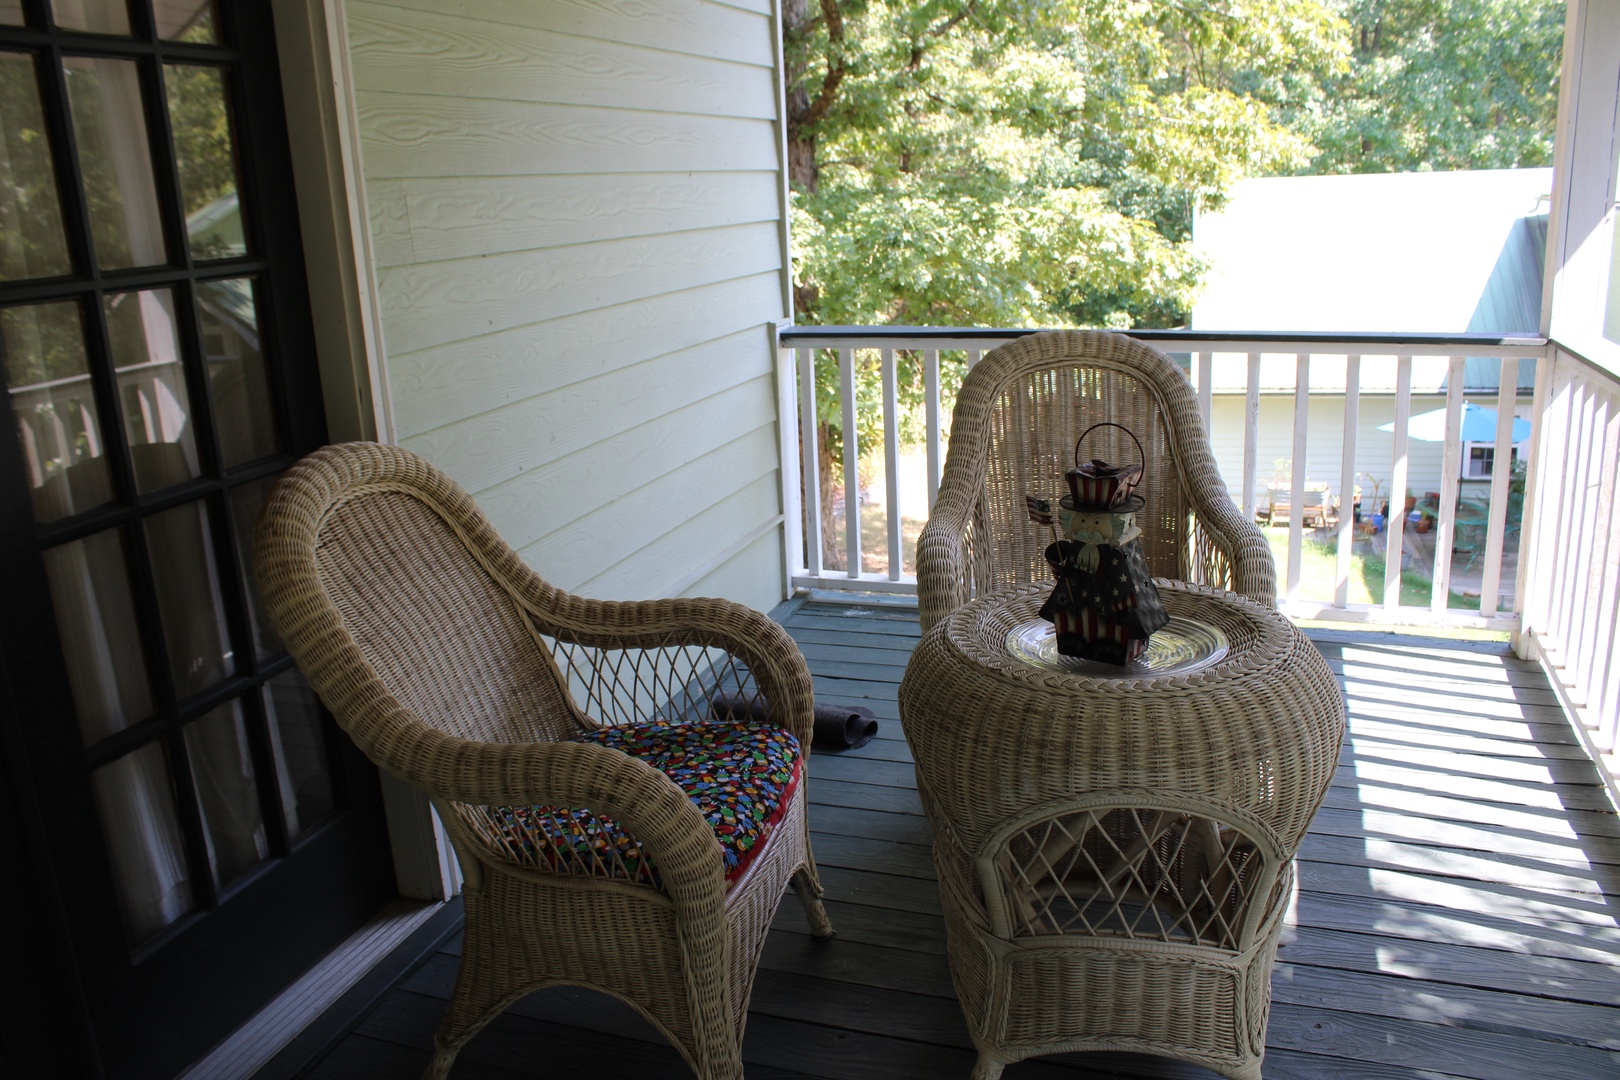 Step outside to the upper-level deck & enjoy the fresh air